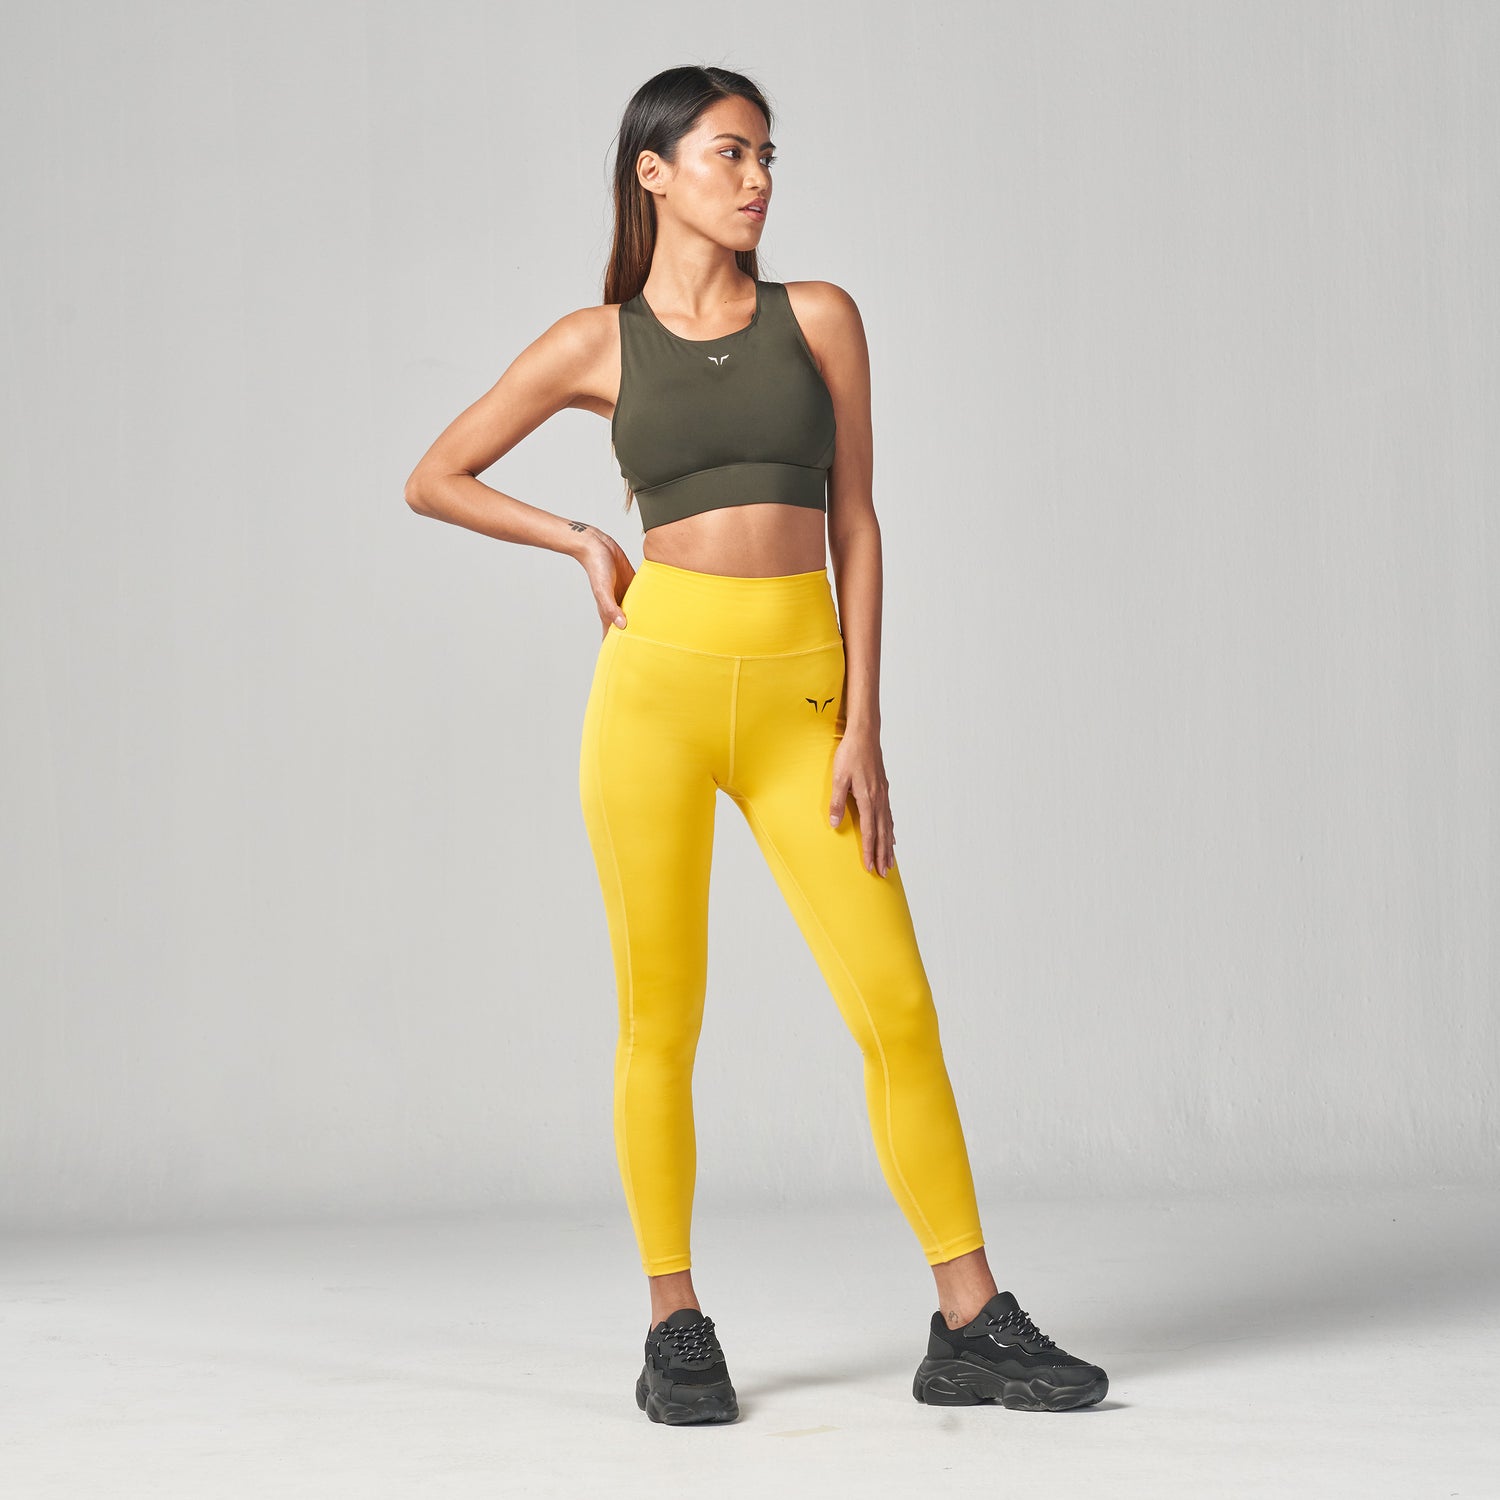 My Top Activewear Picks From the Nordstrom Anniversary Sale#design #model  #dress #shoes #heels #styles #ou… | Workout attire, Cute workout outfits,  Athletic outfits